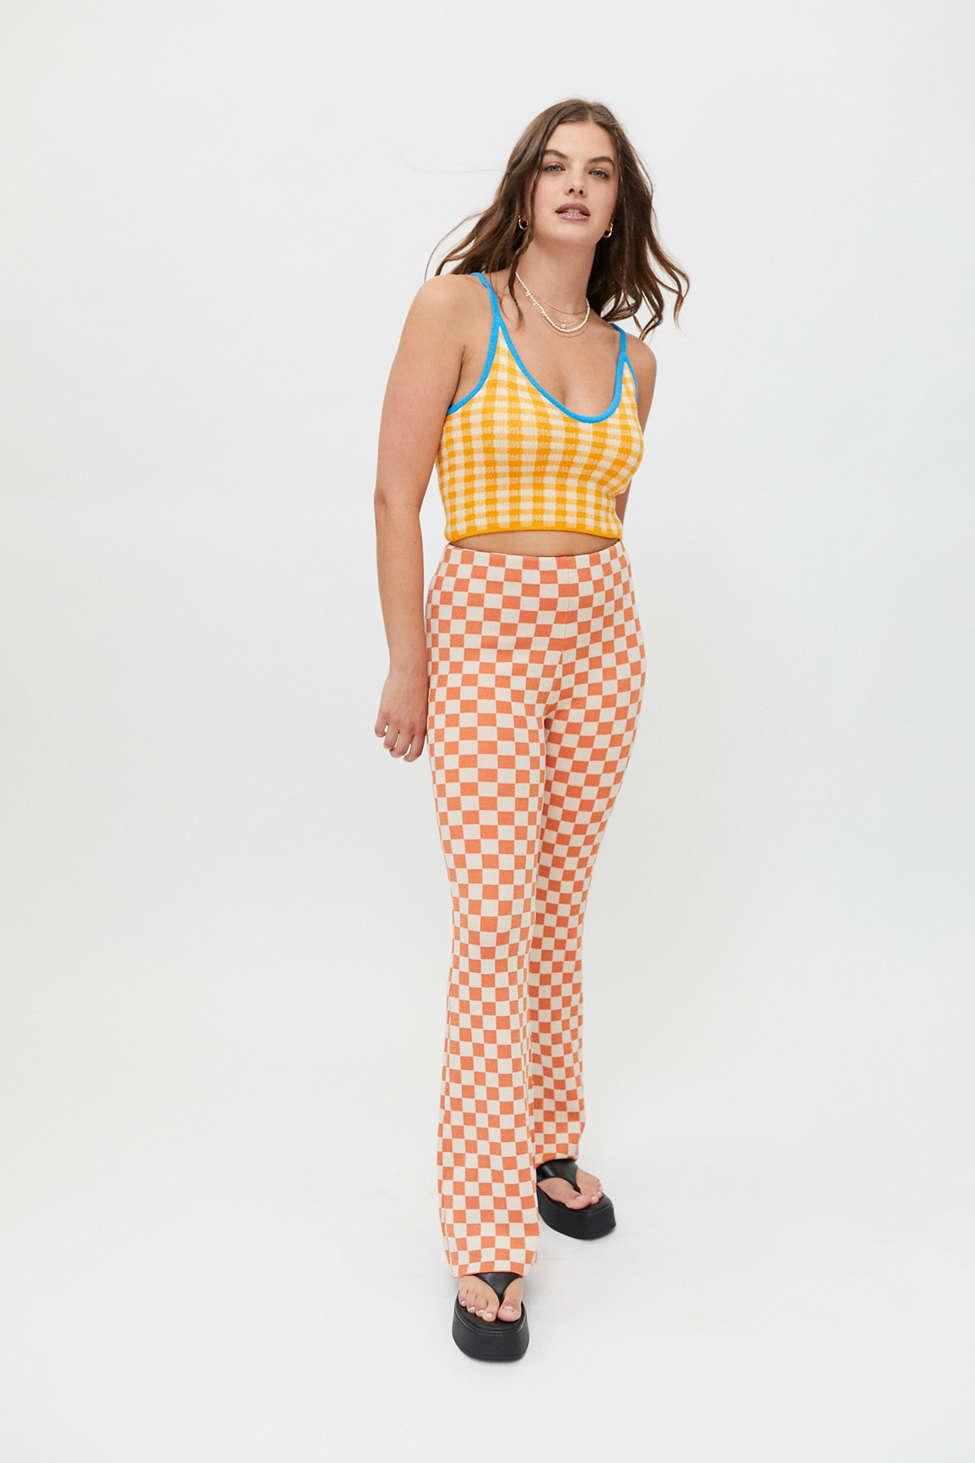 https://cdna.lystit.com/photos/urbanoutfitters/6259c42a/urban-outfitters-designer-Orange-Multi-Uo-Checkered-Knit-Flare-Pant.jpeg